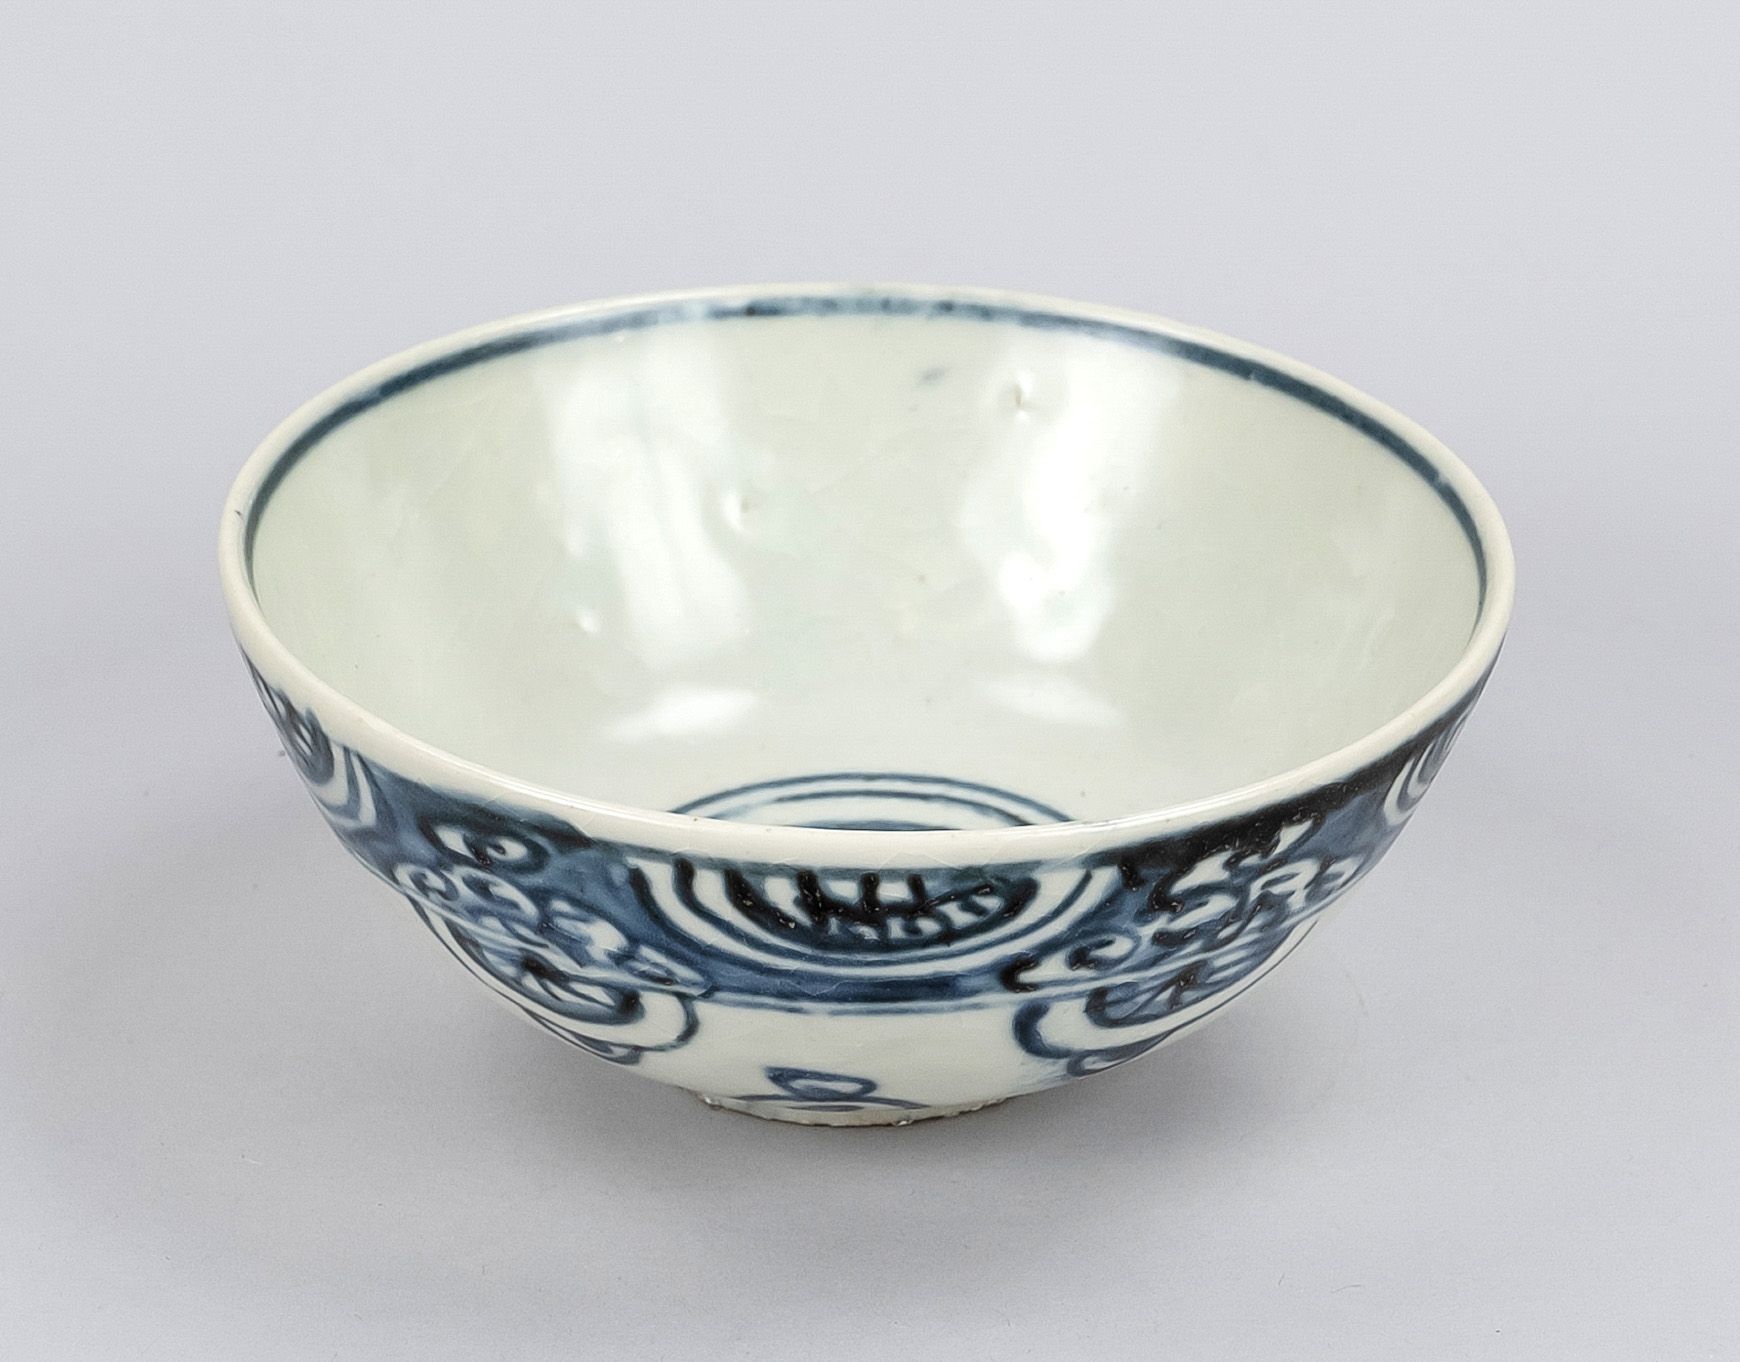 Null Porcelain bowl, China, late Ming dynasty(1368-1644), c. 1620, porcelain wit&hellip;